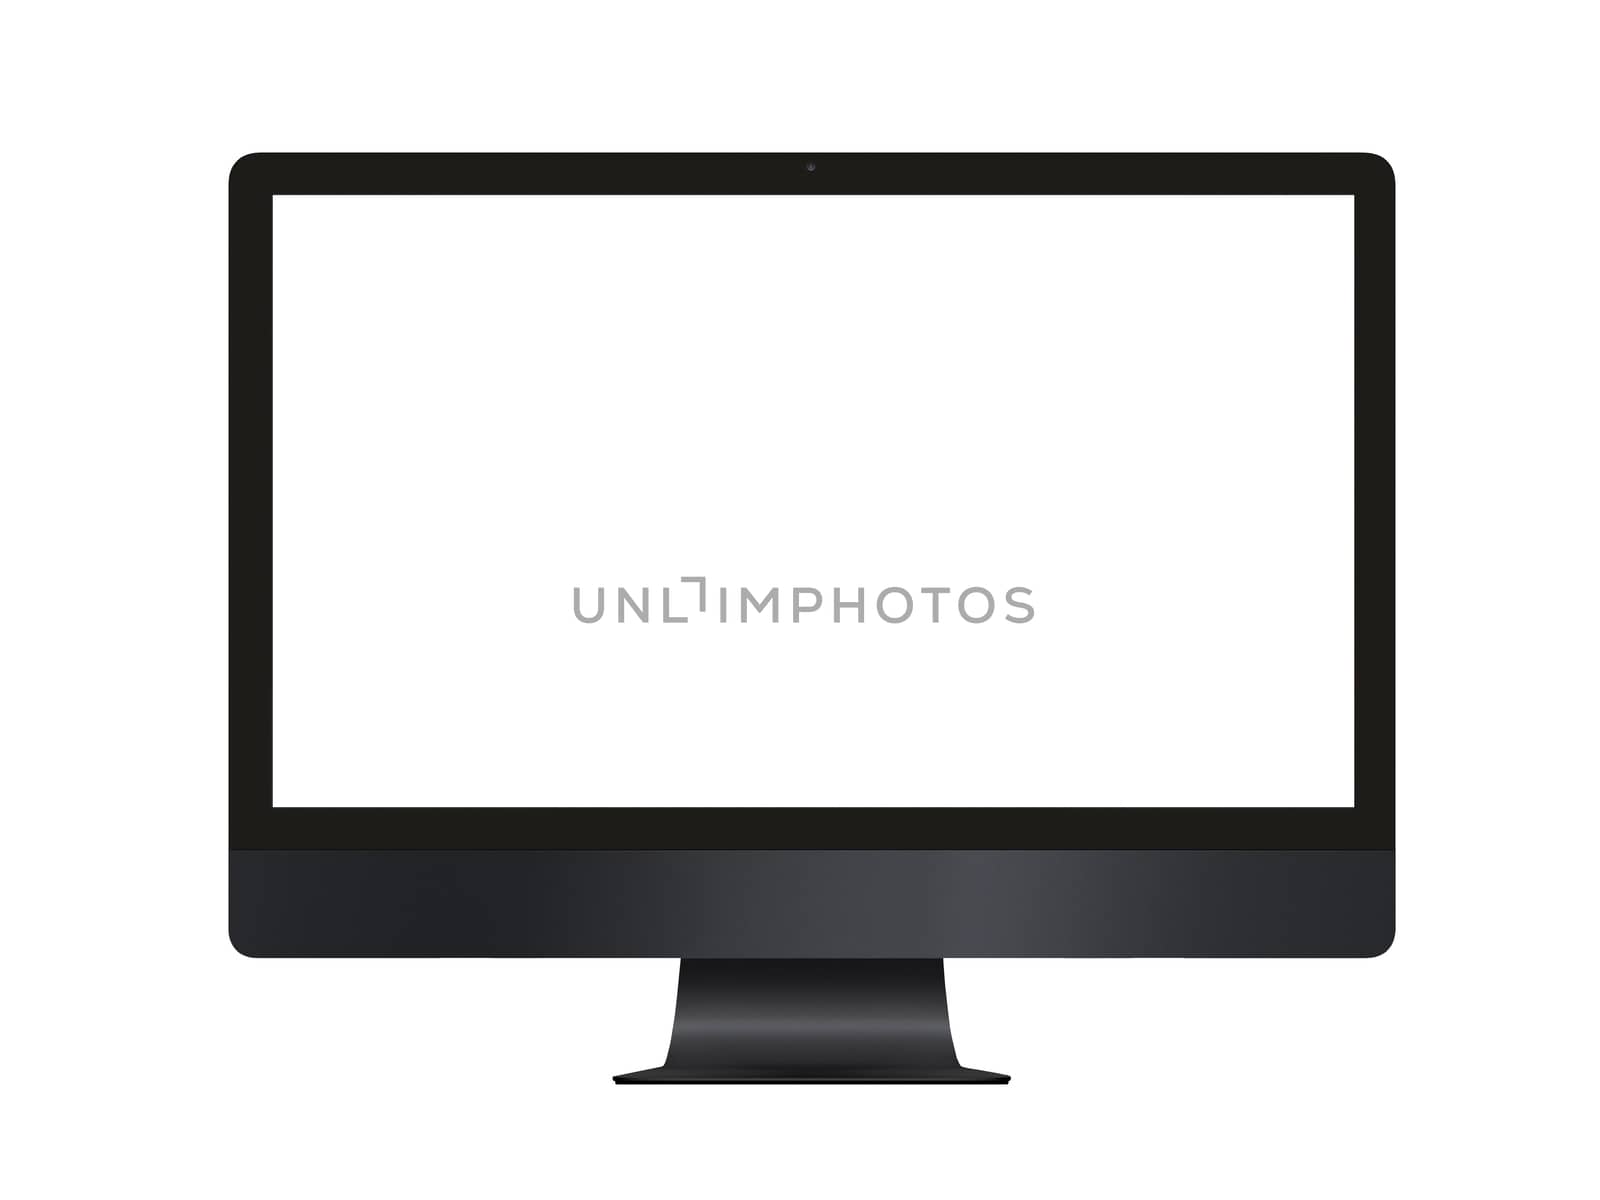 Isolated black professional computer on white blackground